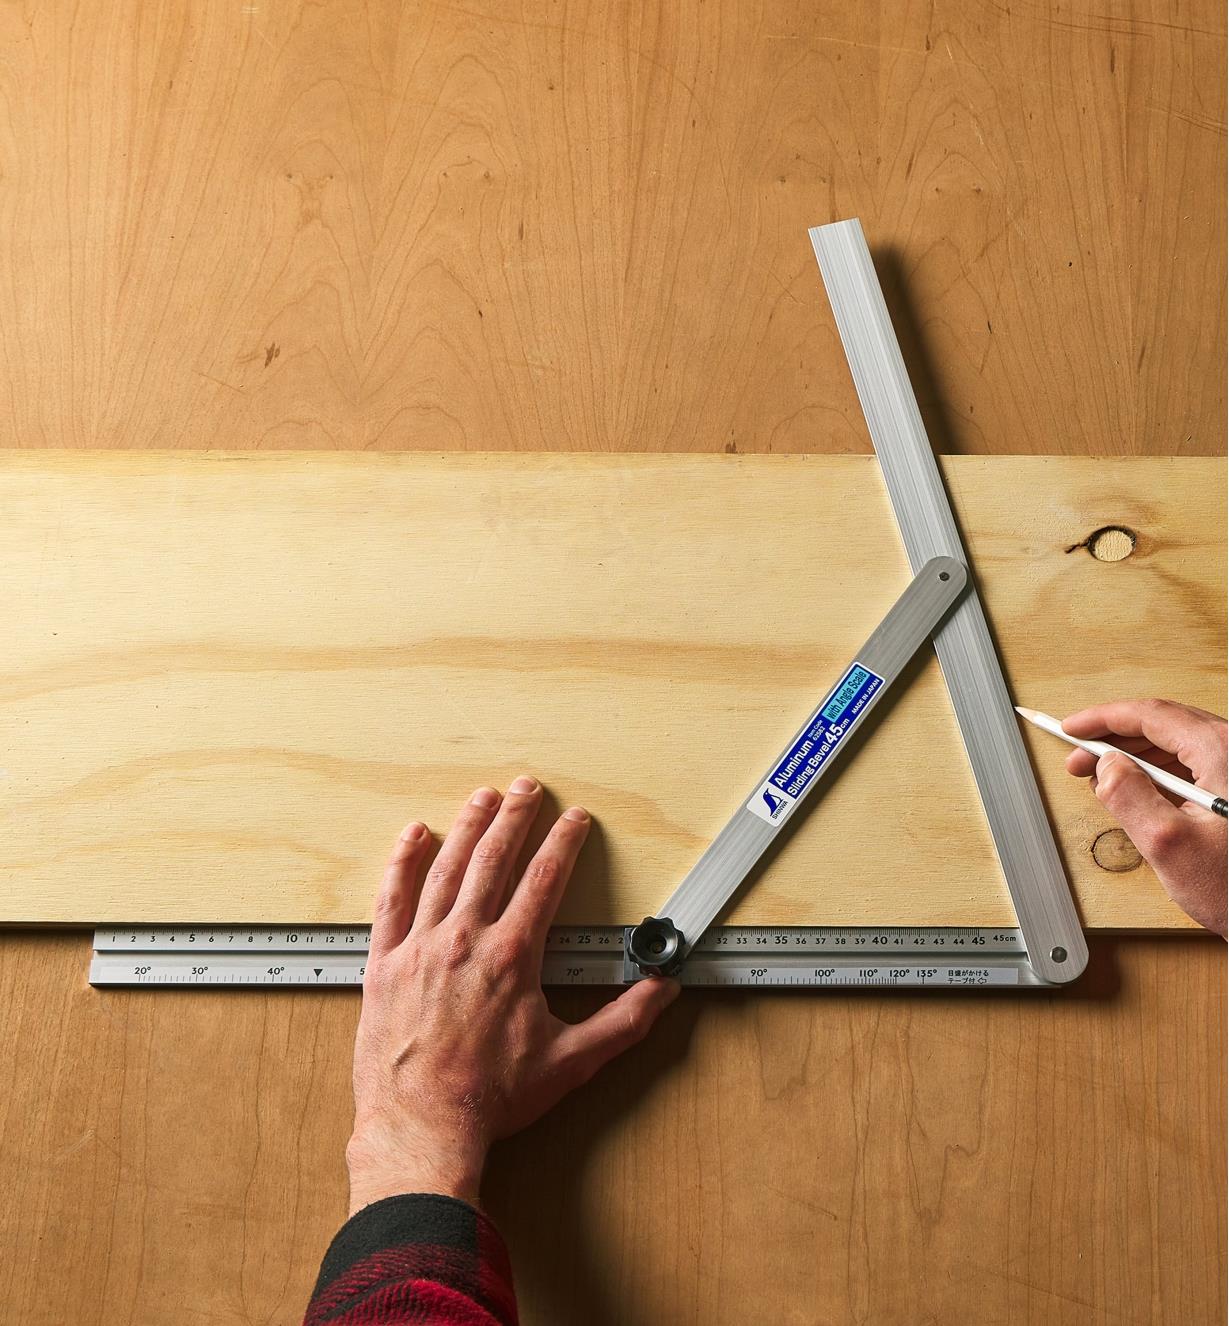 Using a large aluminum bevel to mark an angle on a board